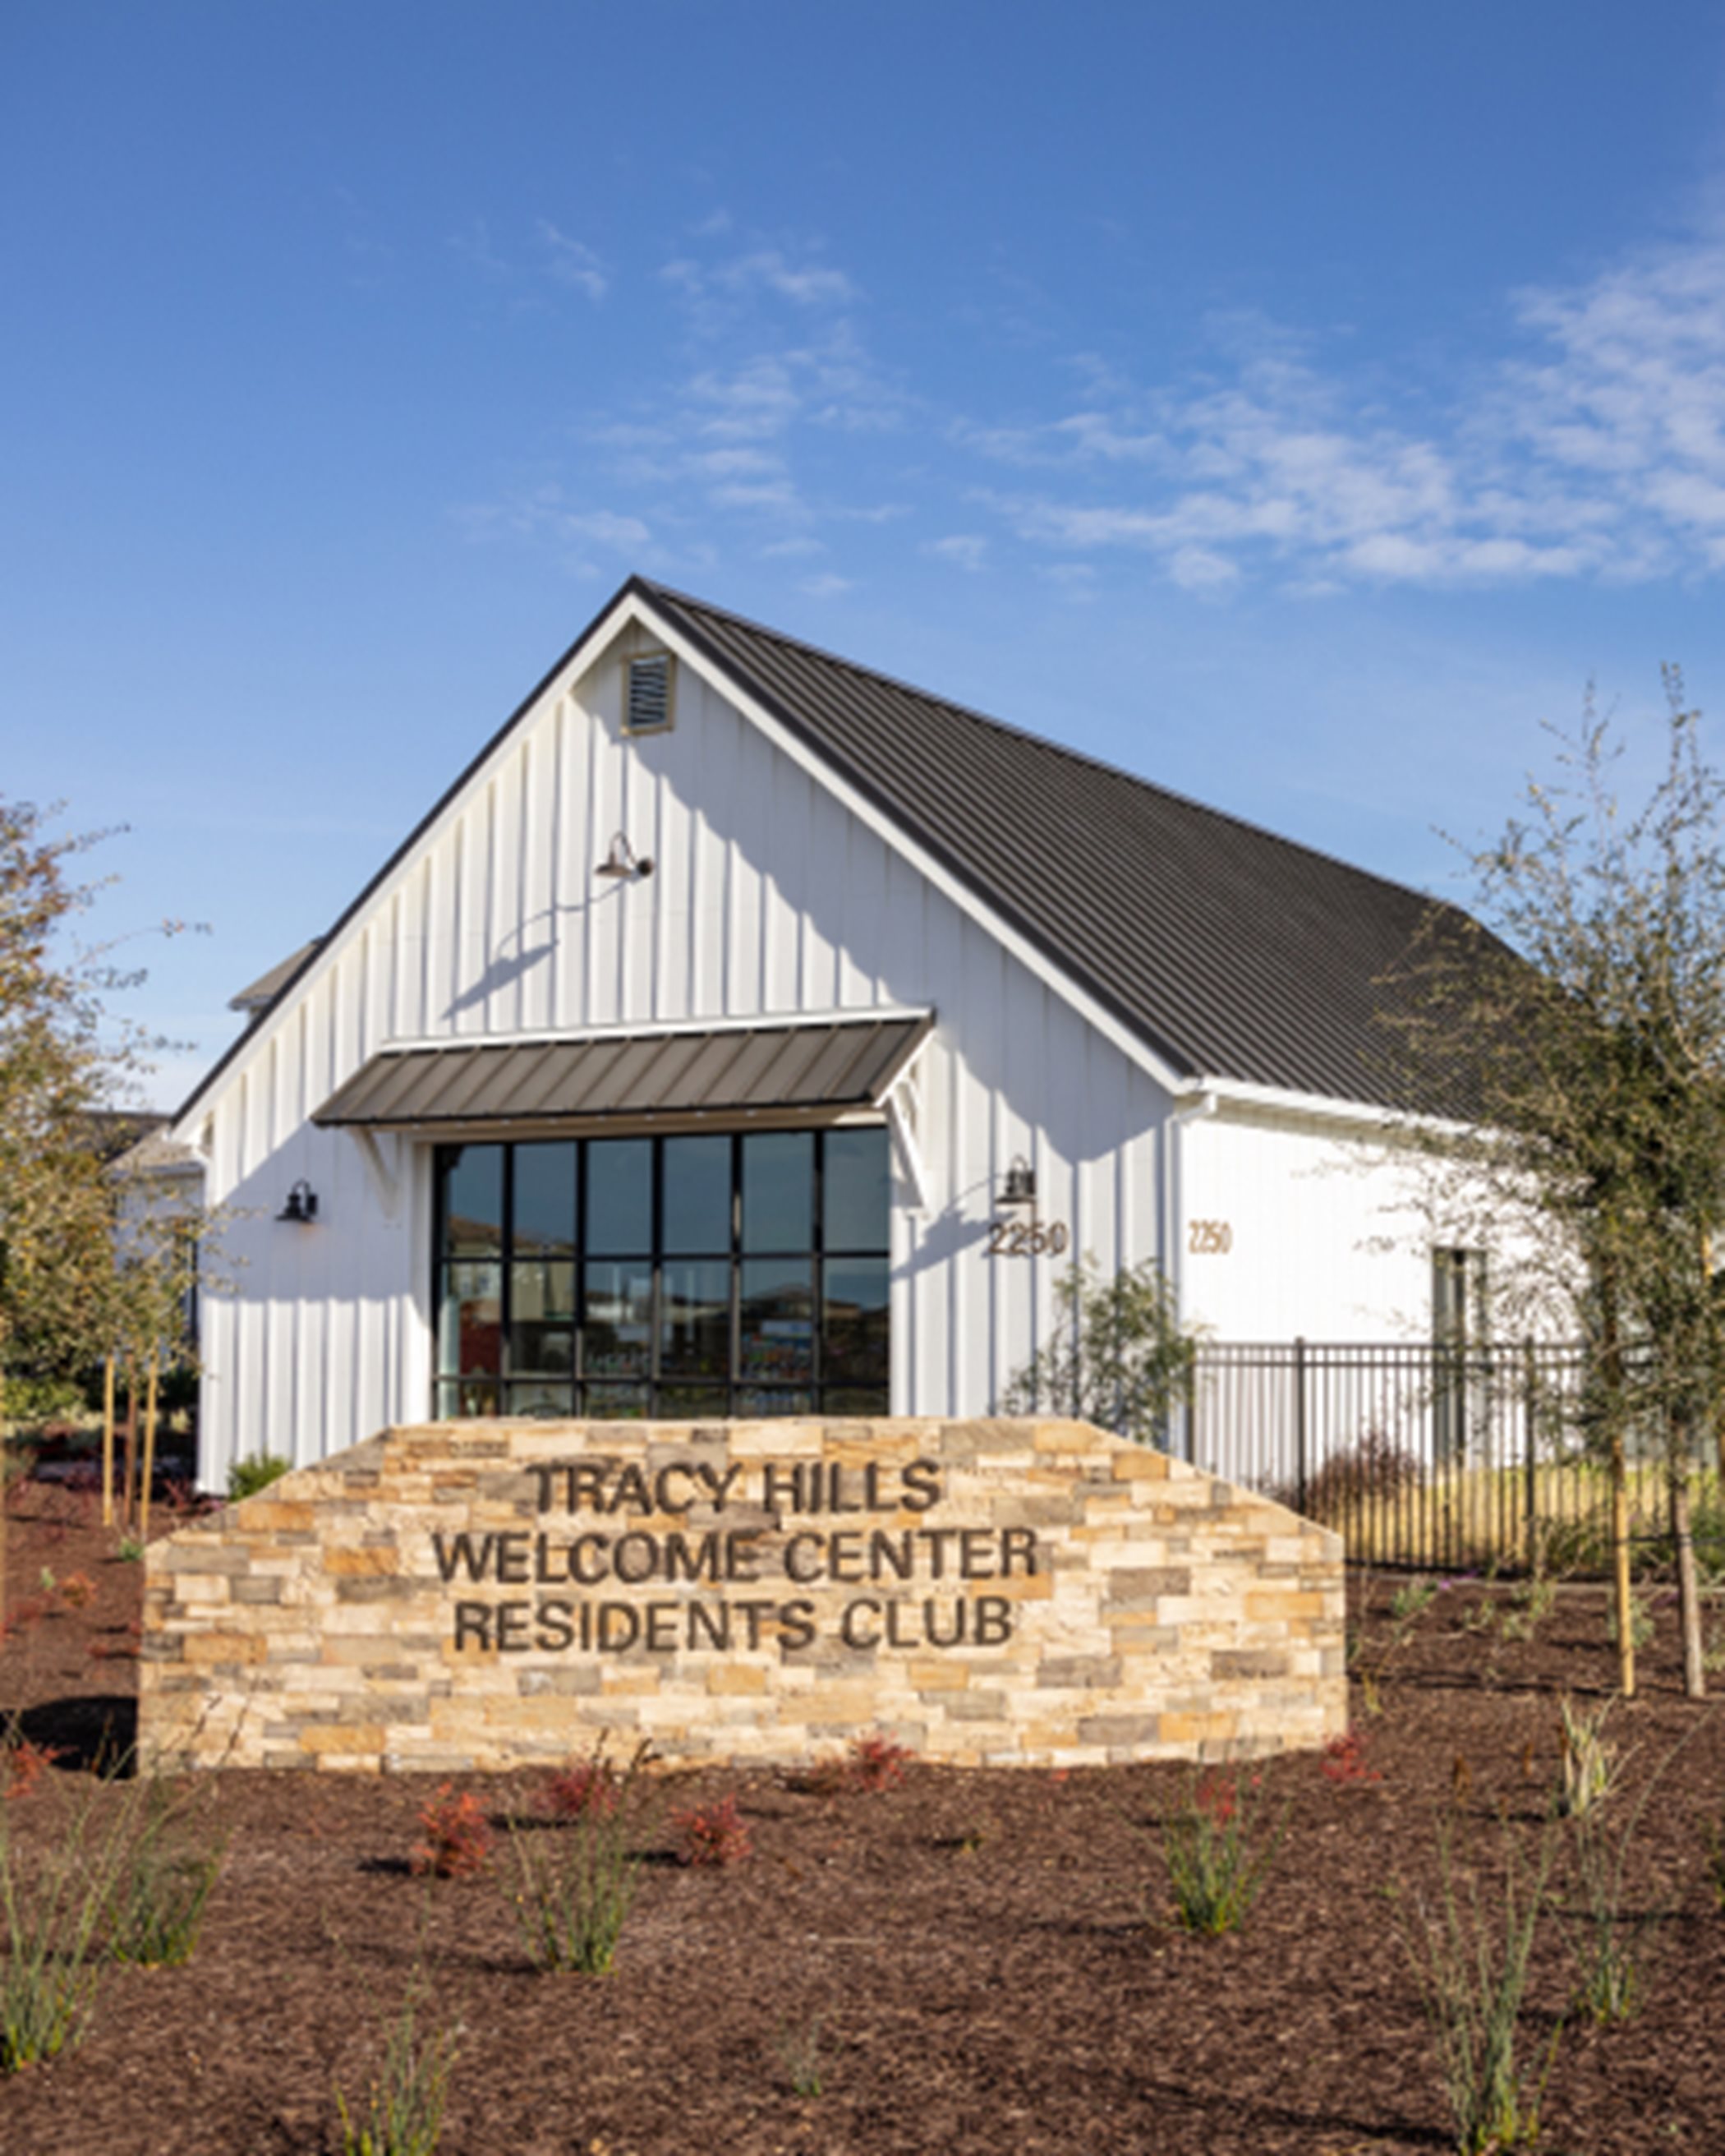 Exterior of welcome center with sign 